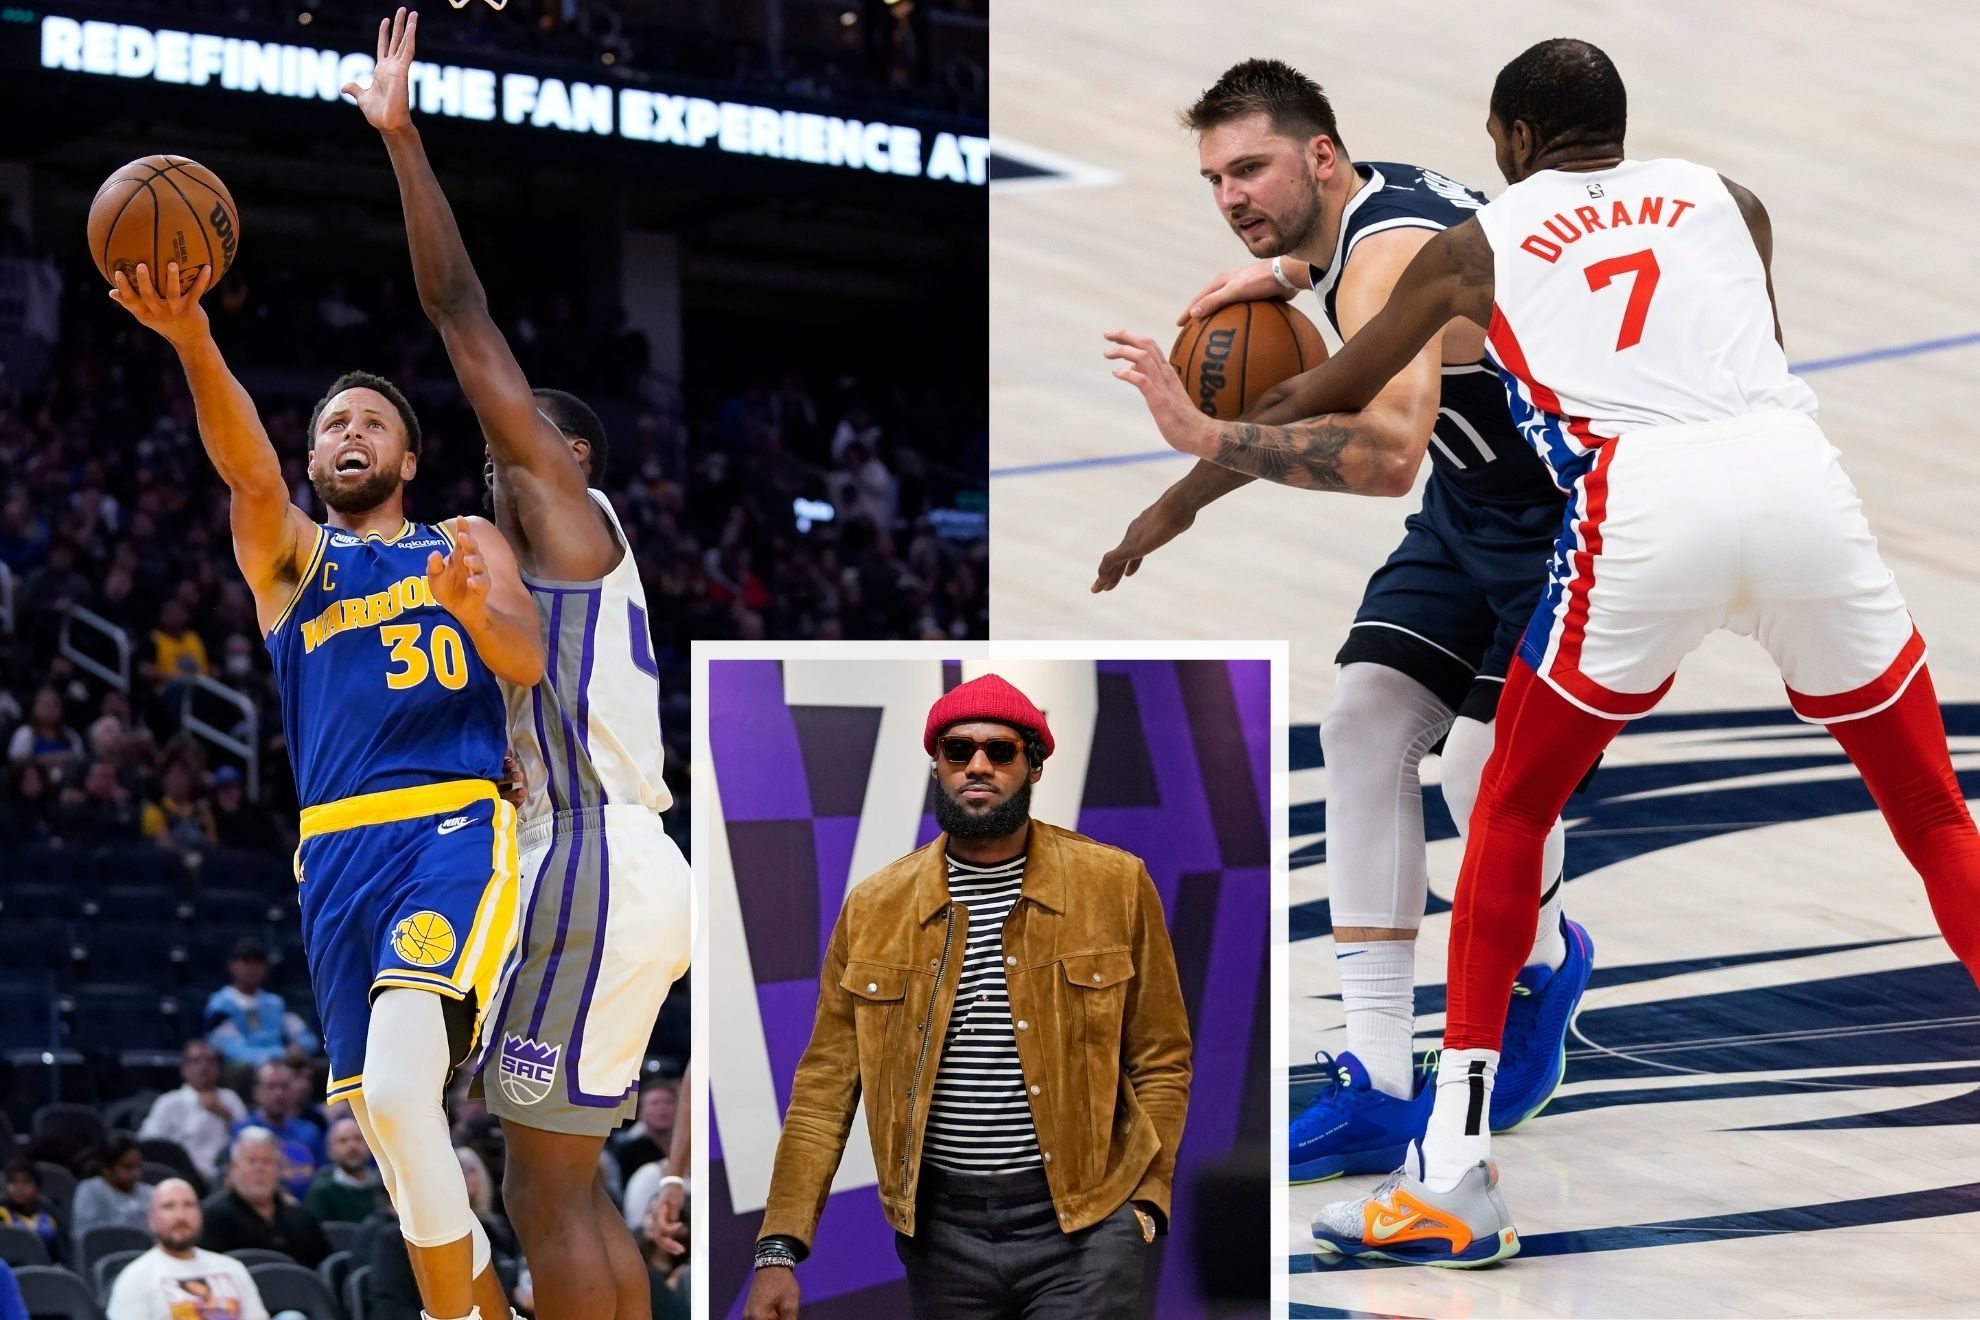 Kings at Warriors (left), LeBron James, Lakers (middle) and Nets at Mavericks (right)